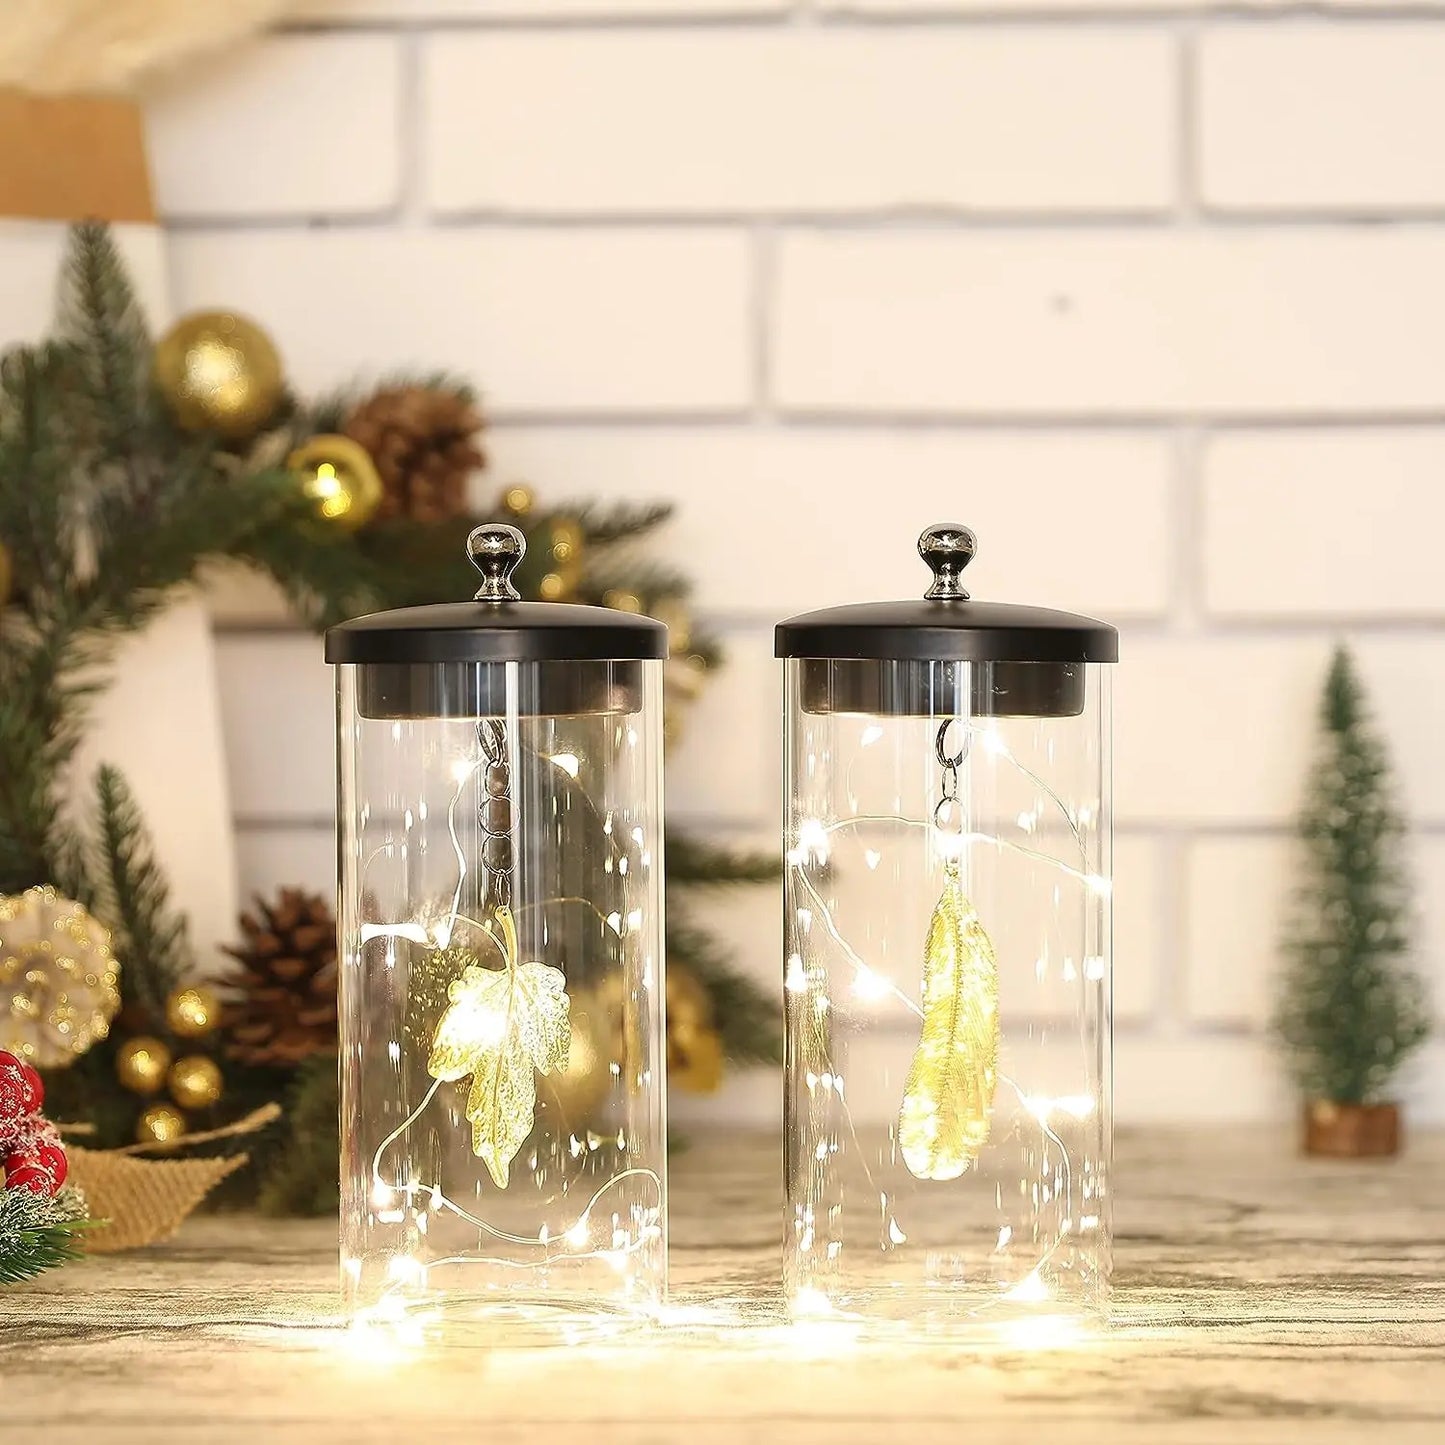 Set of 2 Leaf Pendant Decorative Lamp Battery Powered Lights 7" Tall Cordless Lamp Light with Fairy Lights for Living Room Bedroom Kitchen Wedding Xmas